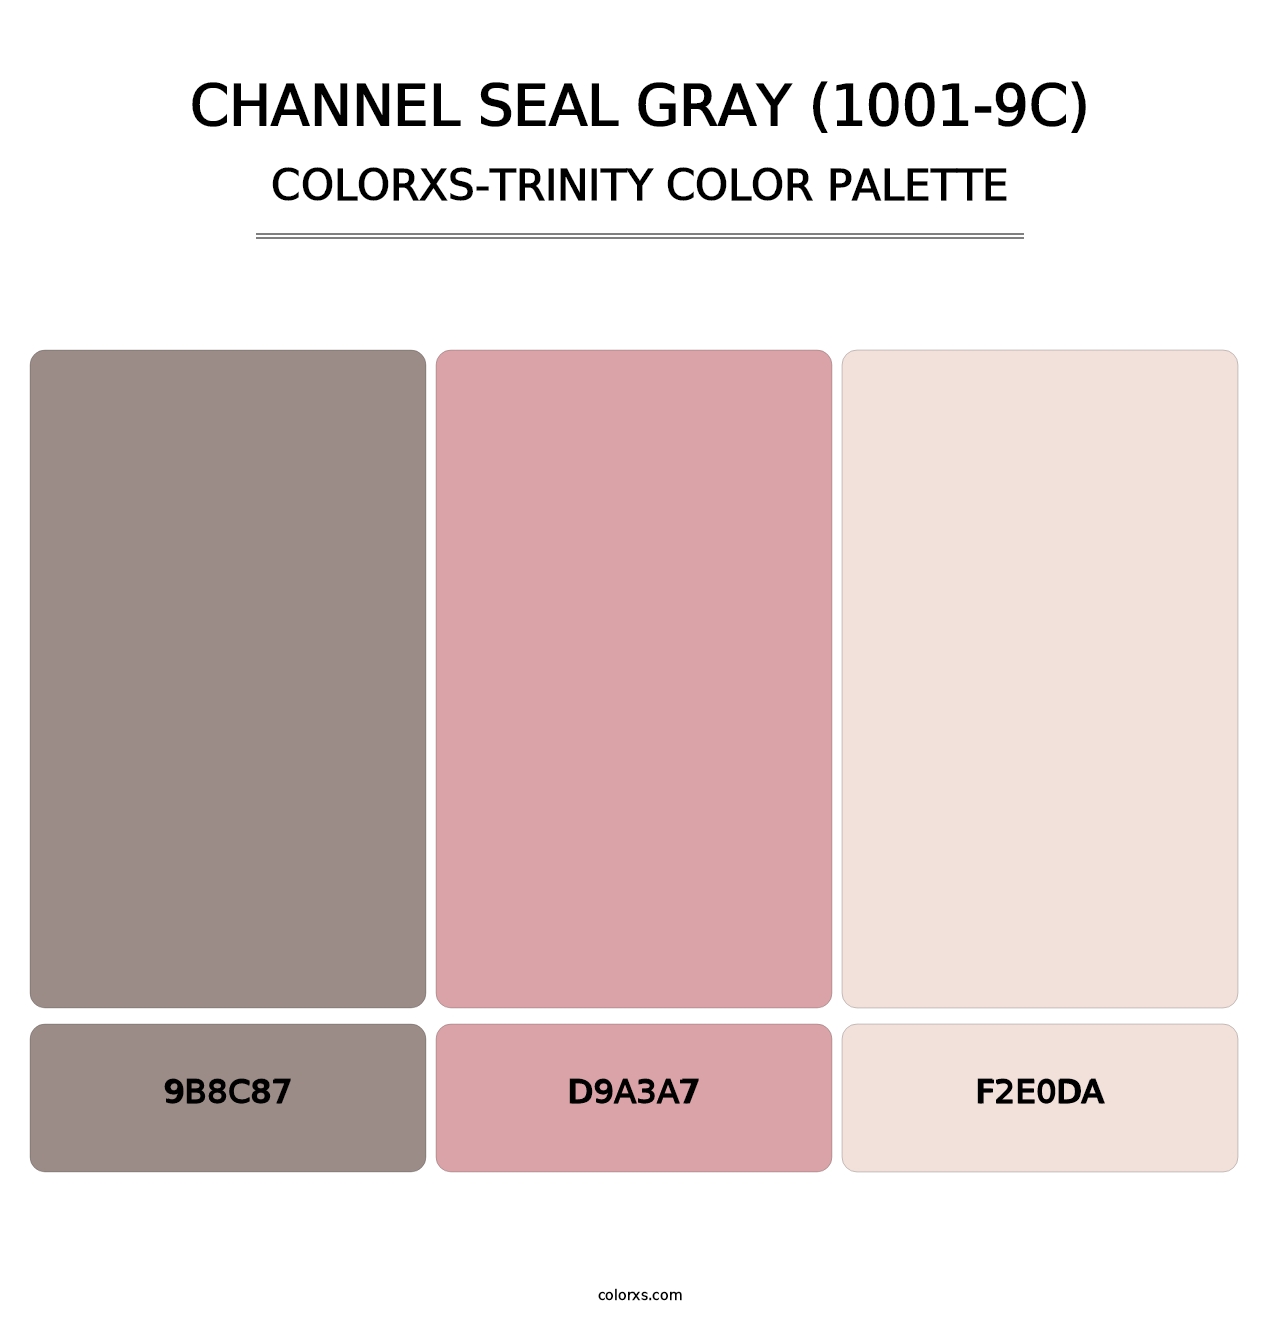 Channel Seal Gray (1001-9C) - Colorxs Trinity Palette